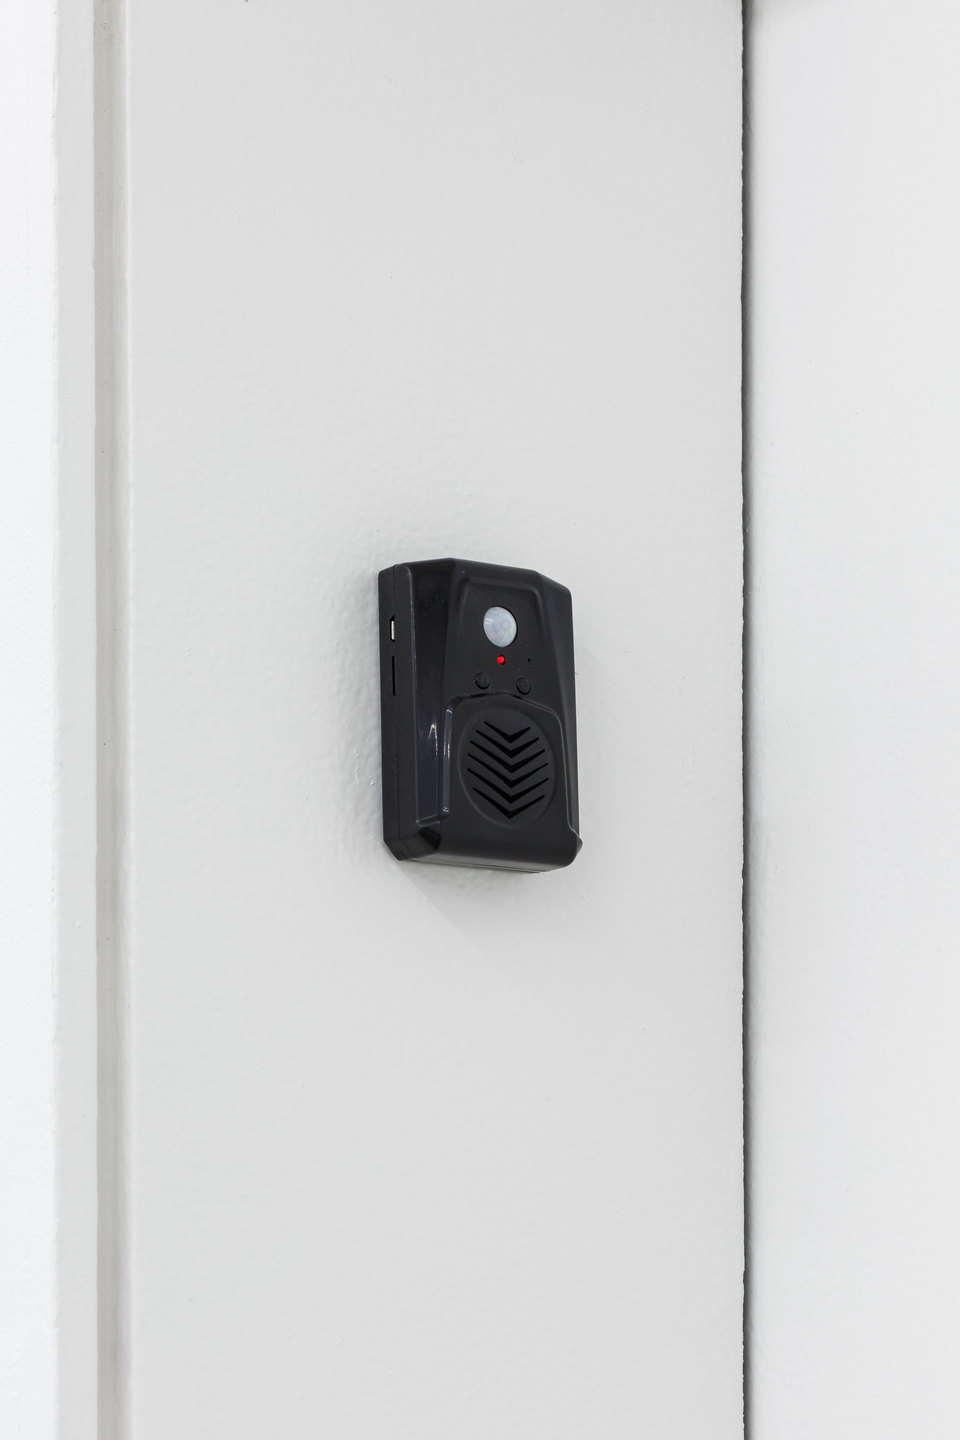 Rosa Aiello, 'Untitled (Blasey Ford)', 2019, Infrared motion sensor activated speaker, single channel sound 00:00:08, Cell Project Space